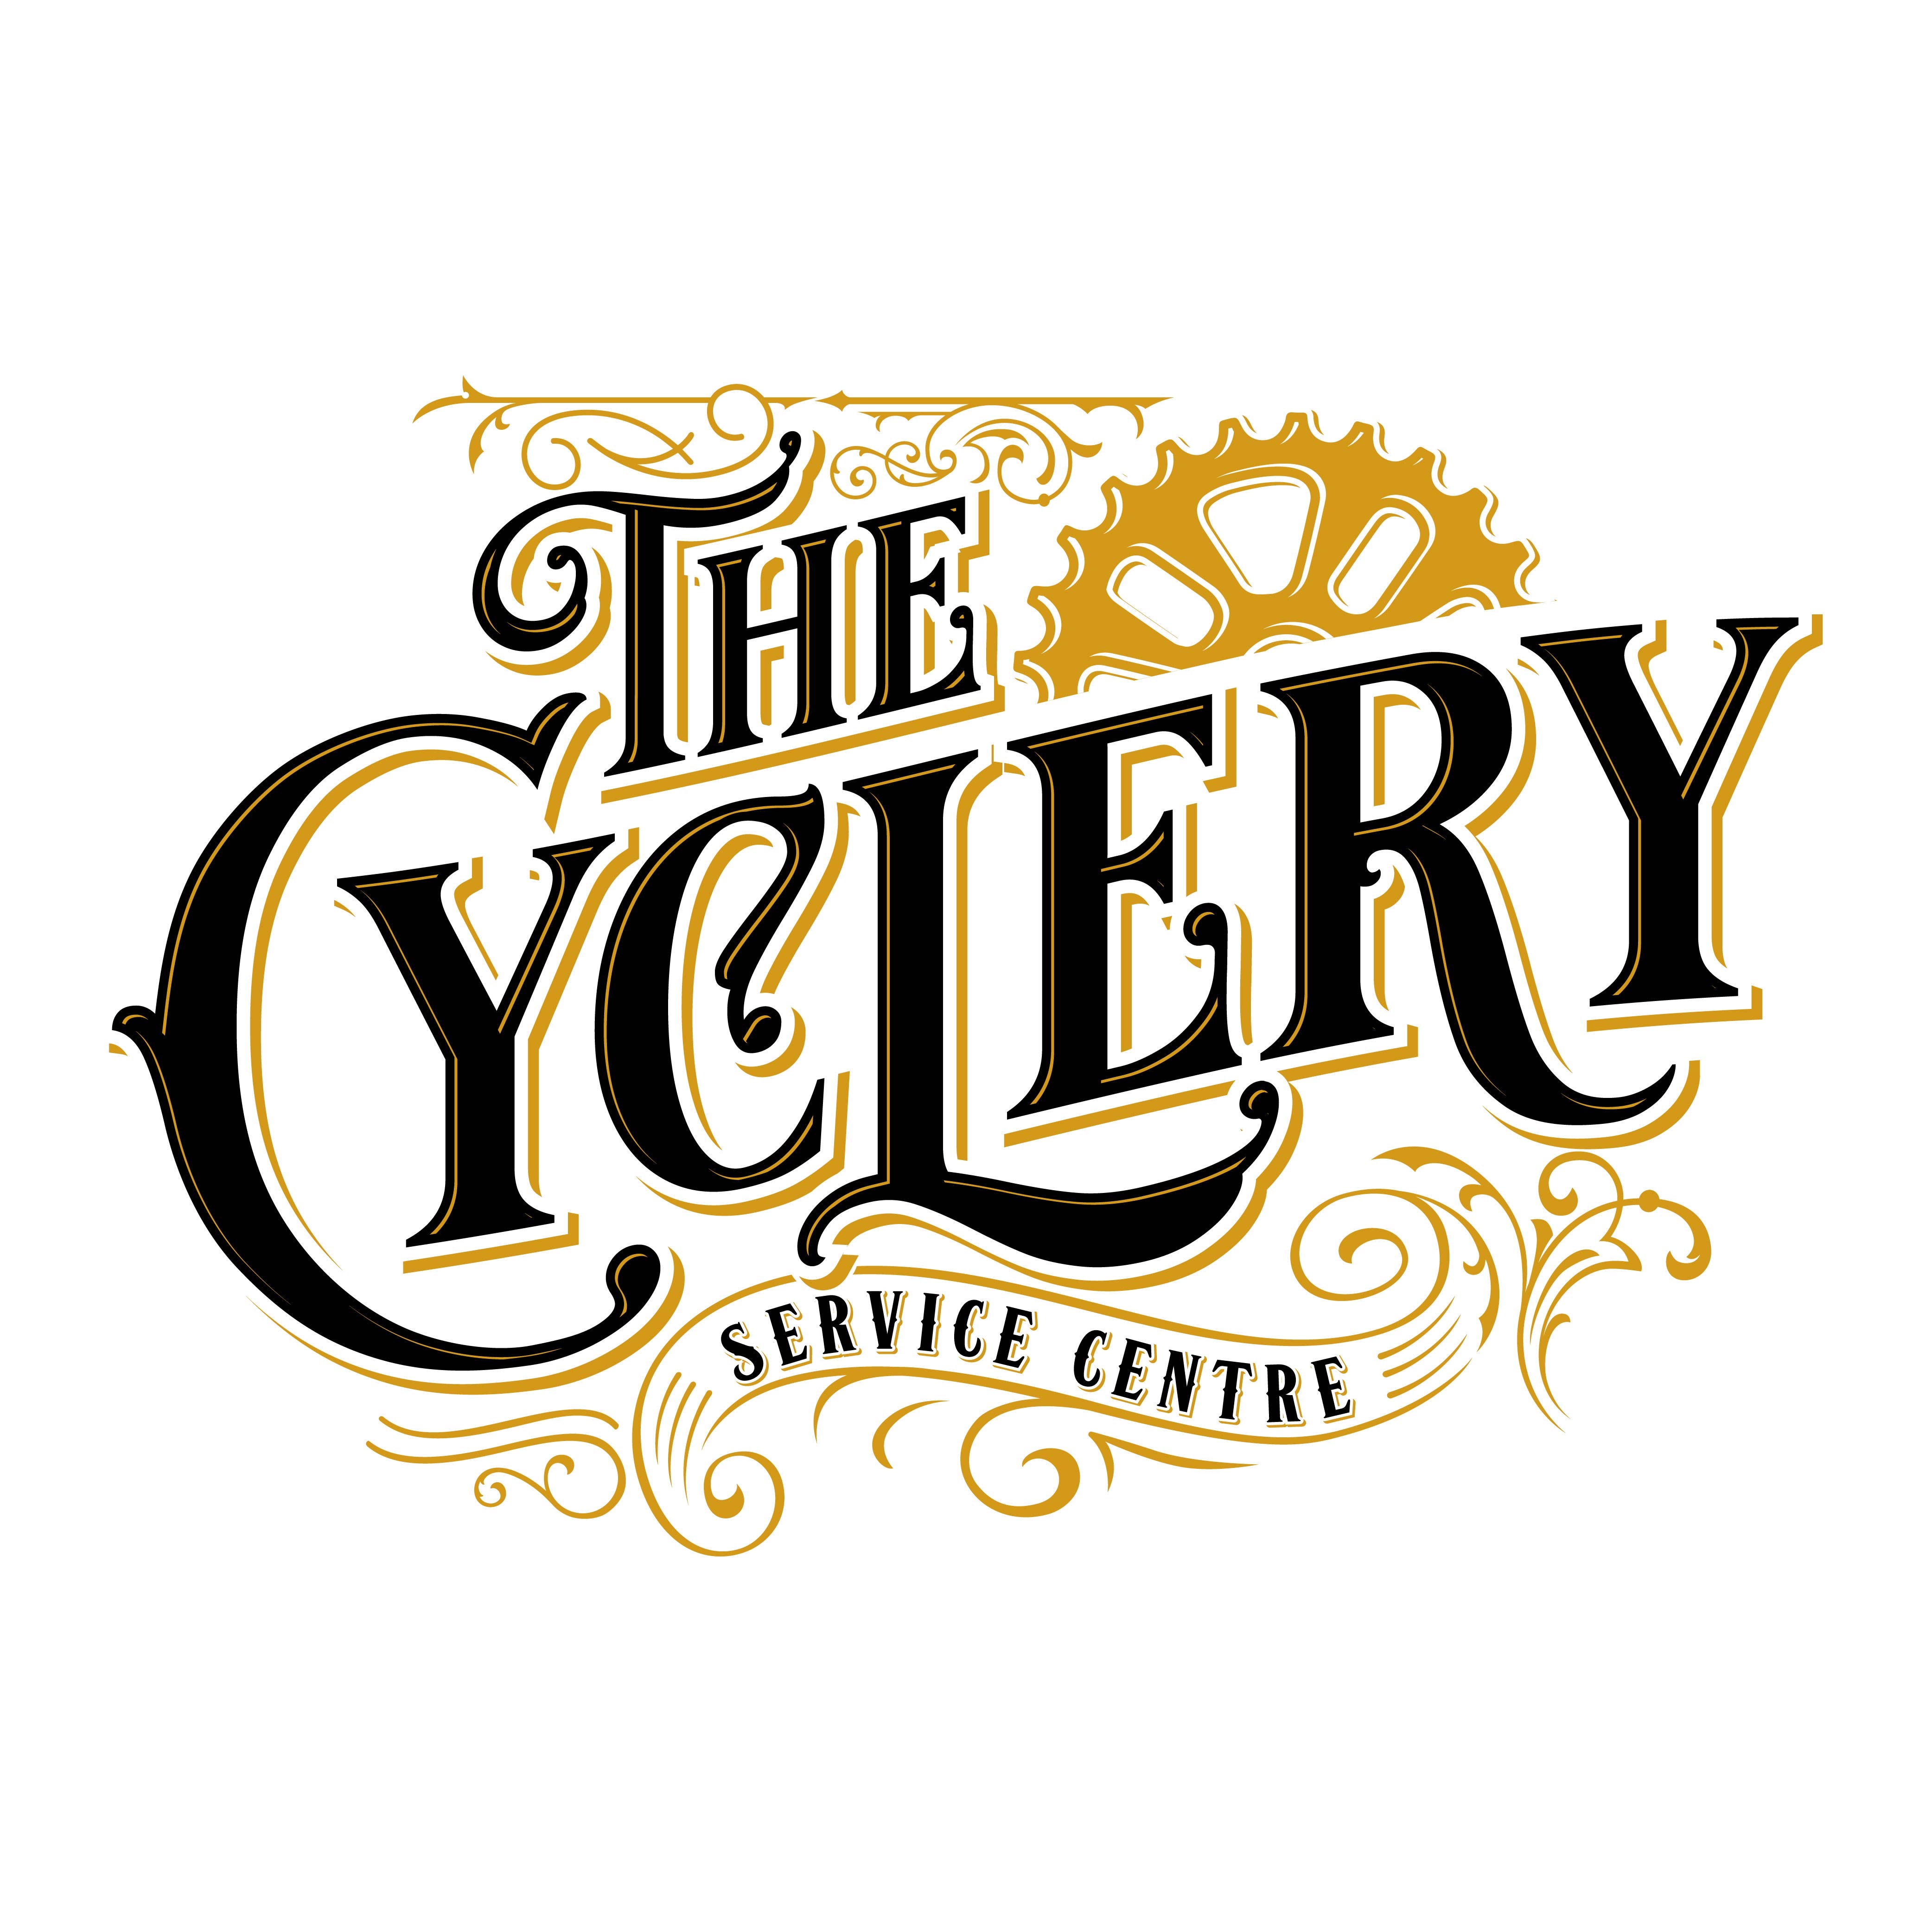 THE CYCLERY SERVICE CENTRE